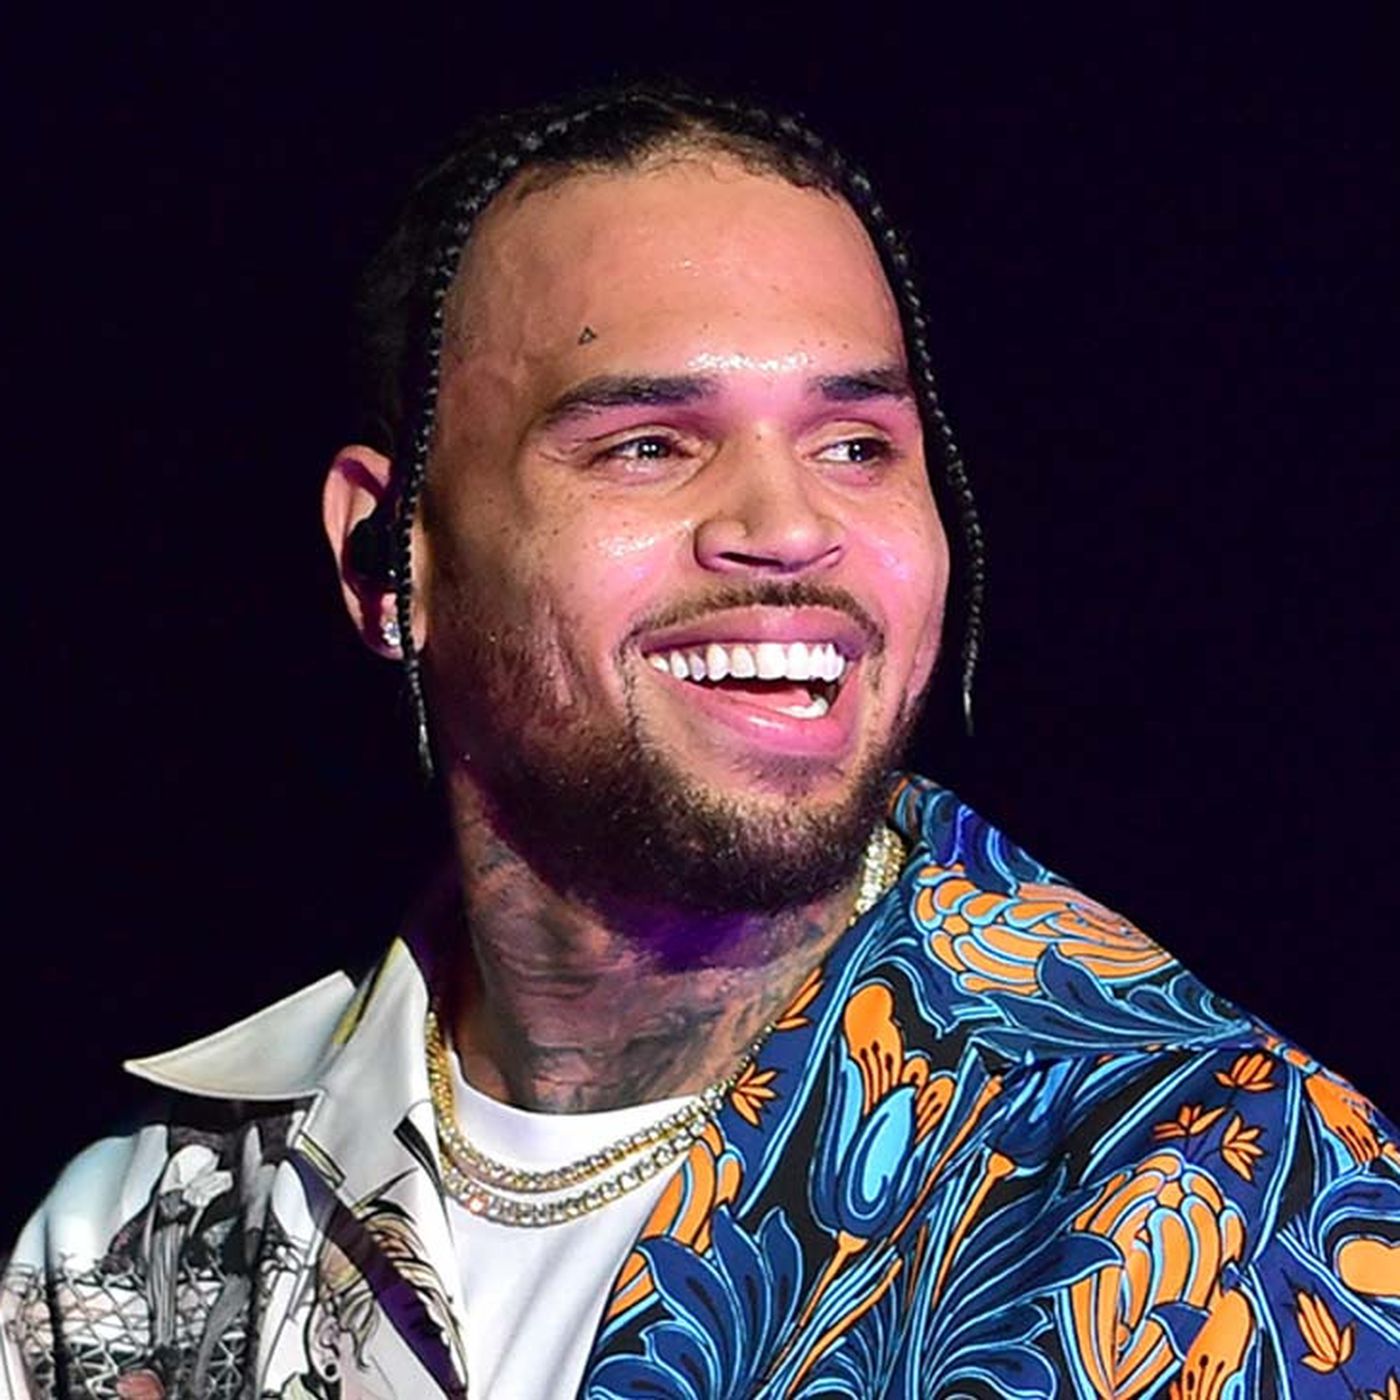 Chris brown set to launch a new cereal brand, Cosmic crunch